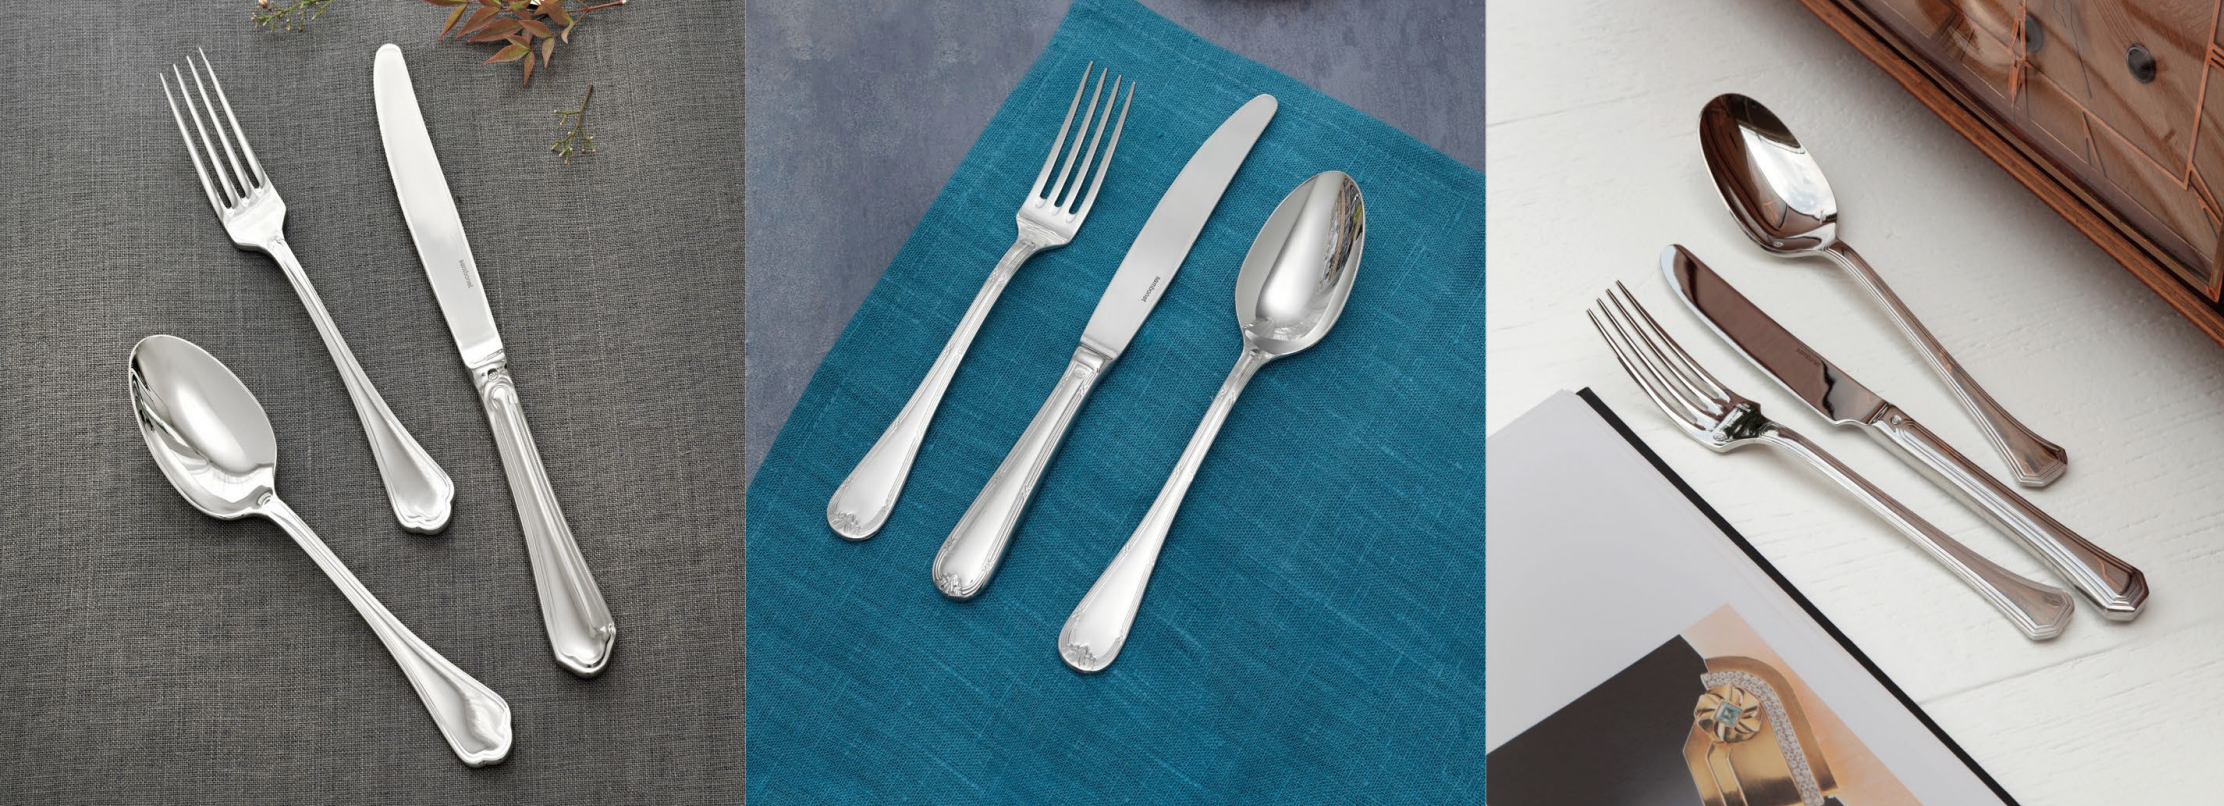 3 images, side by side, of forks, spoons, and knives